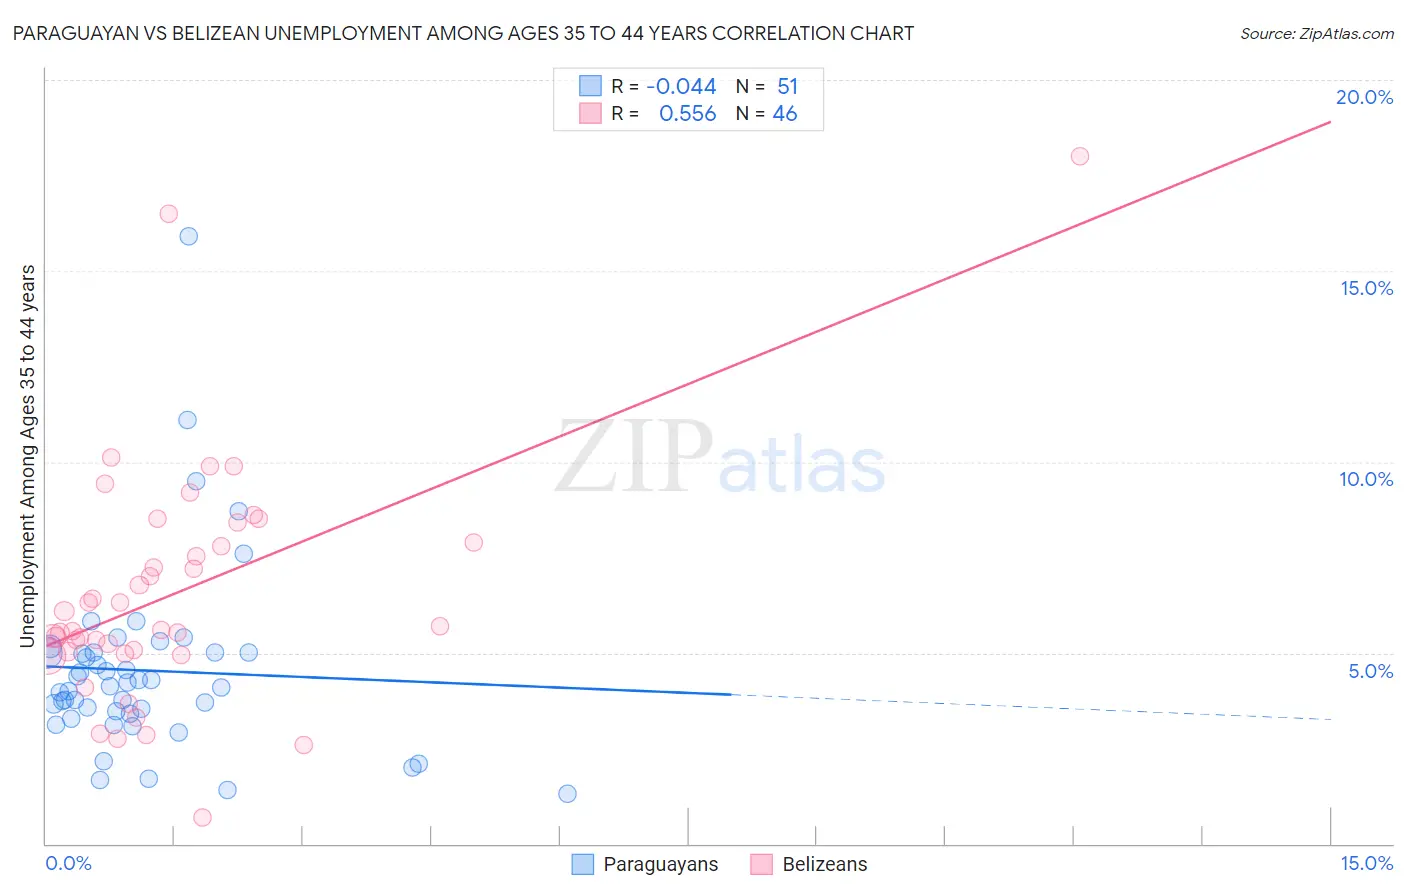 Paraguayan vs Belizean Unemployment Among Ages 35 to 44 years